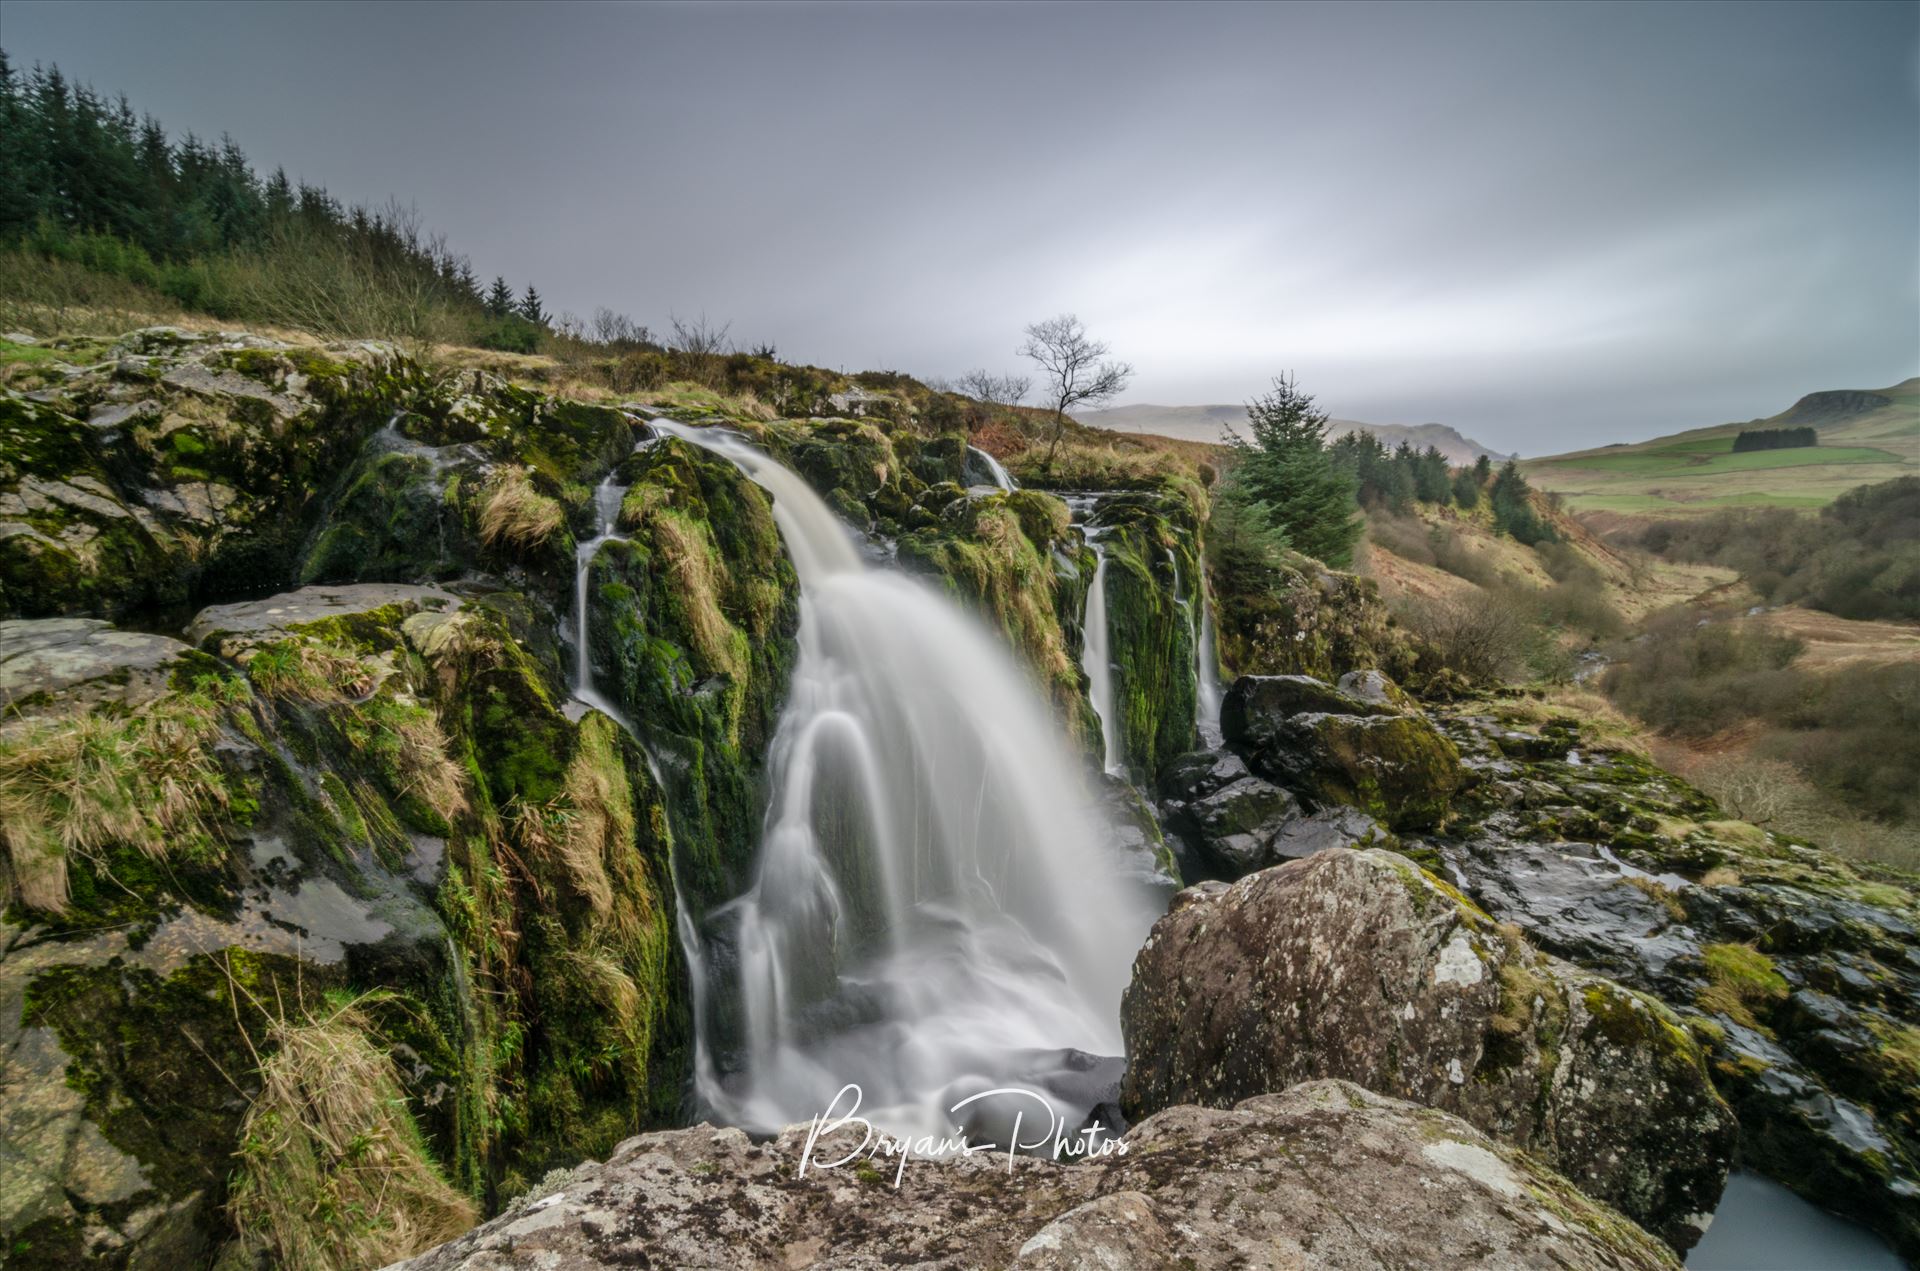 The Loup Of Fintry A long exposure colour photograph of the Loup Of Fintry in the Fintry Hills. by Bryans Photos